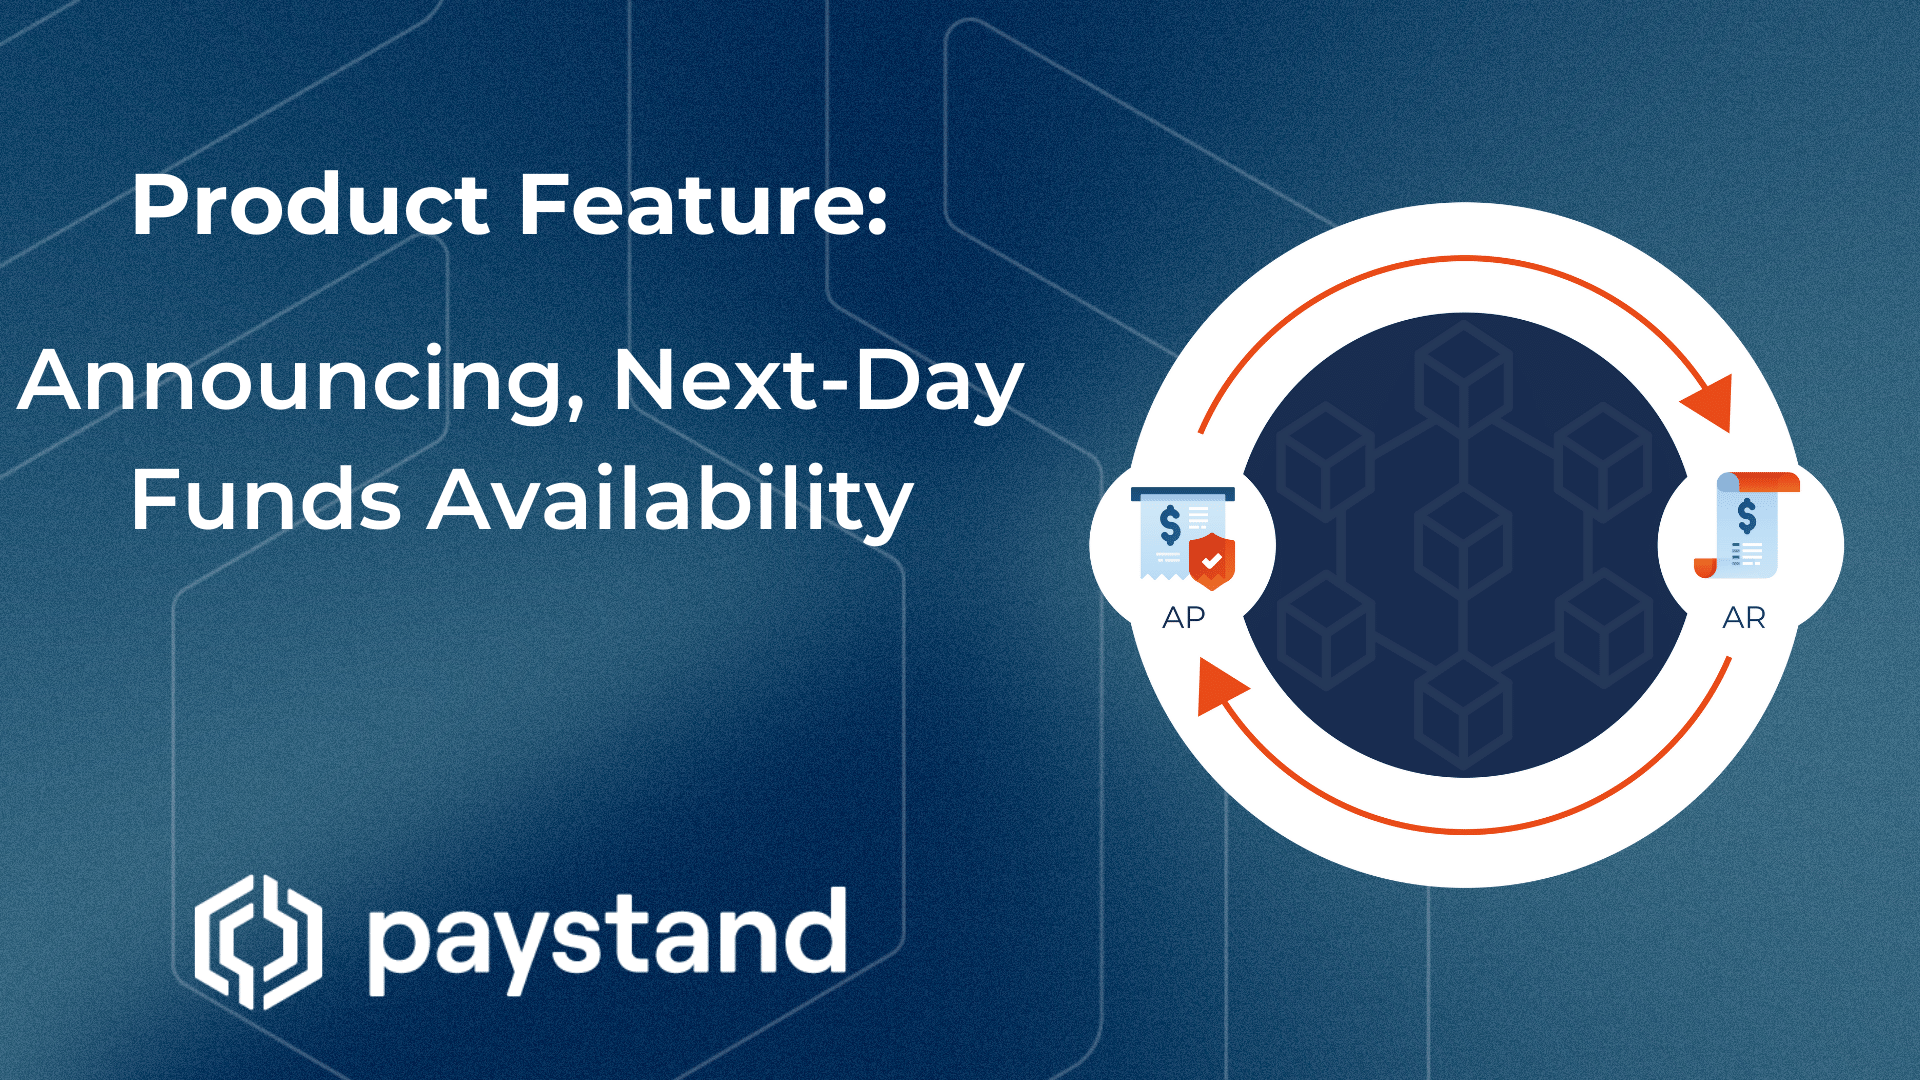 Product Feature: Announcing Next-Day Funds Availability